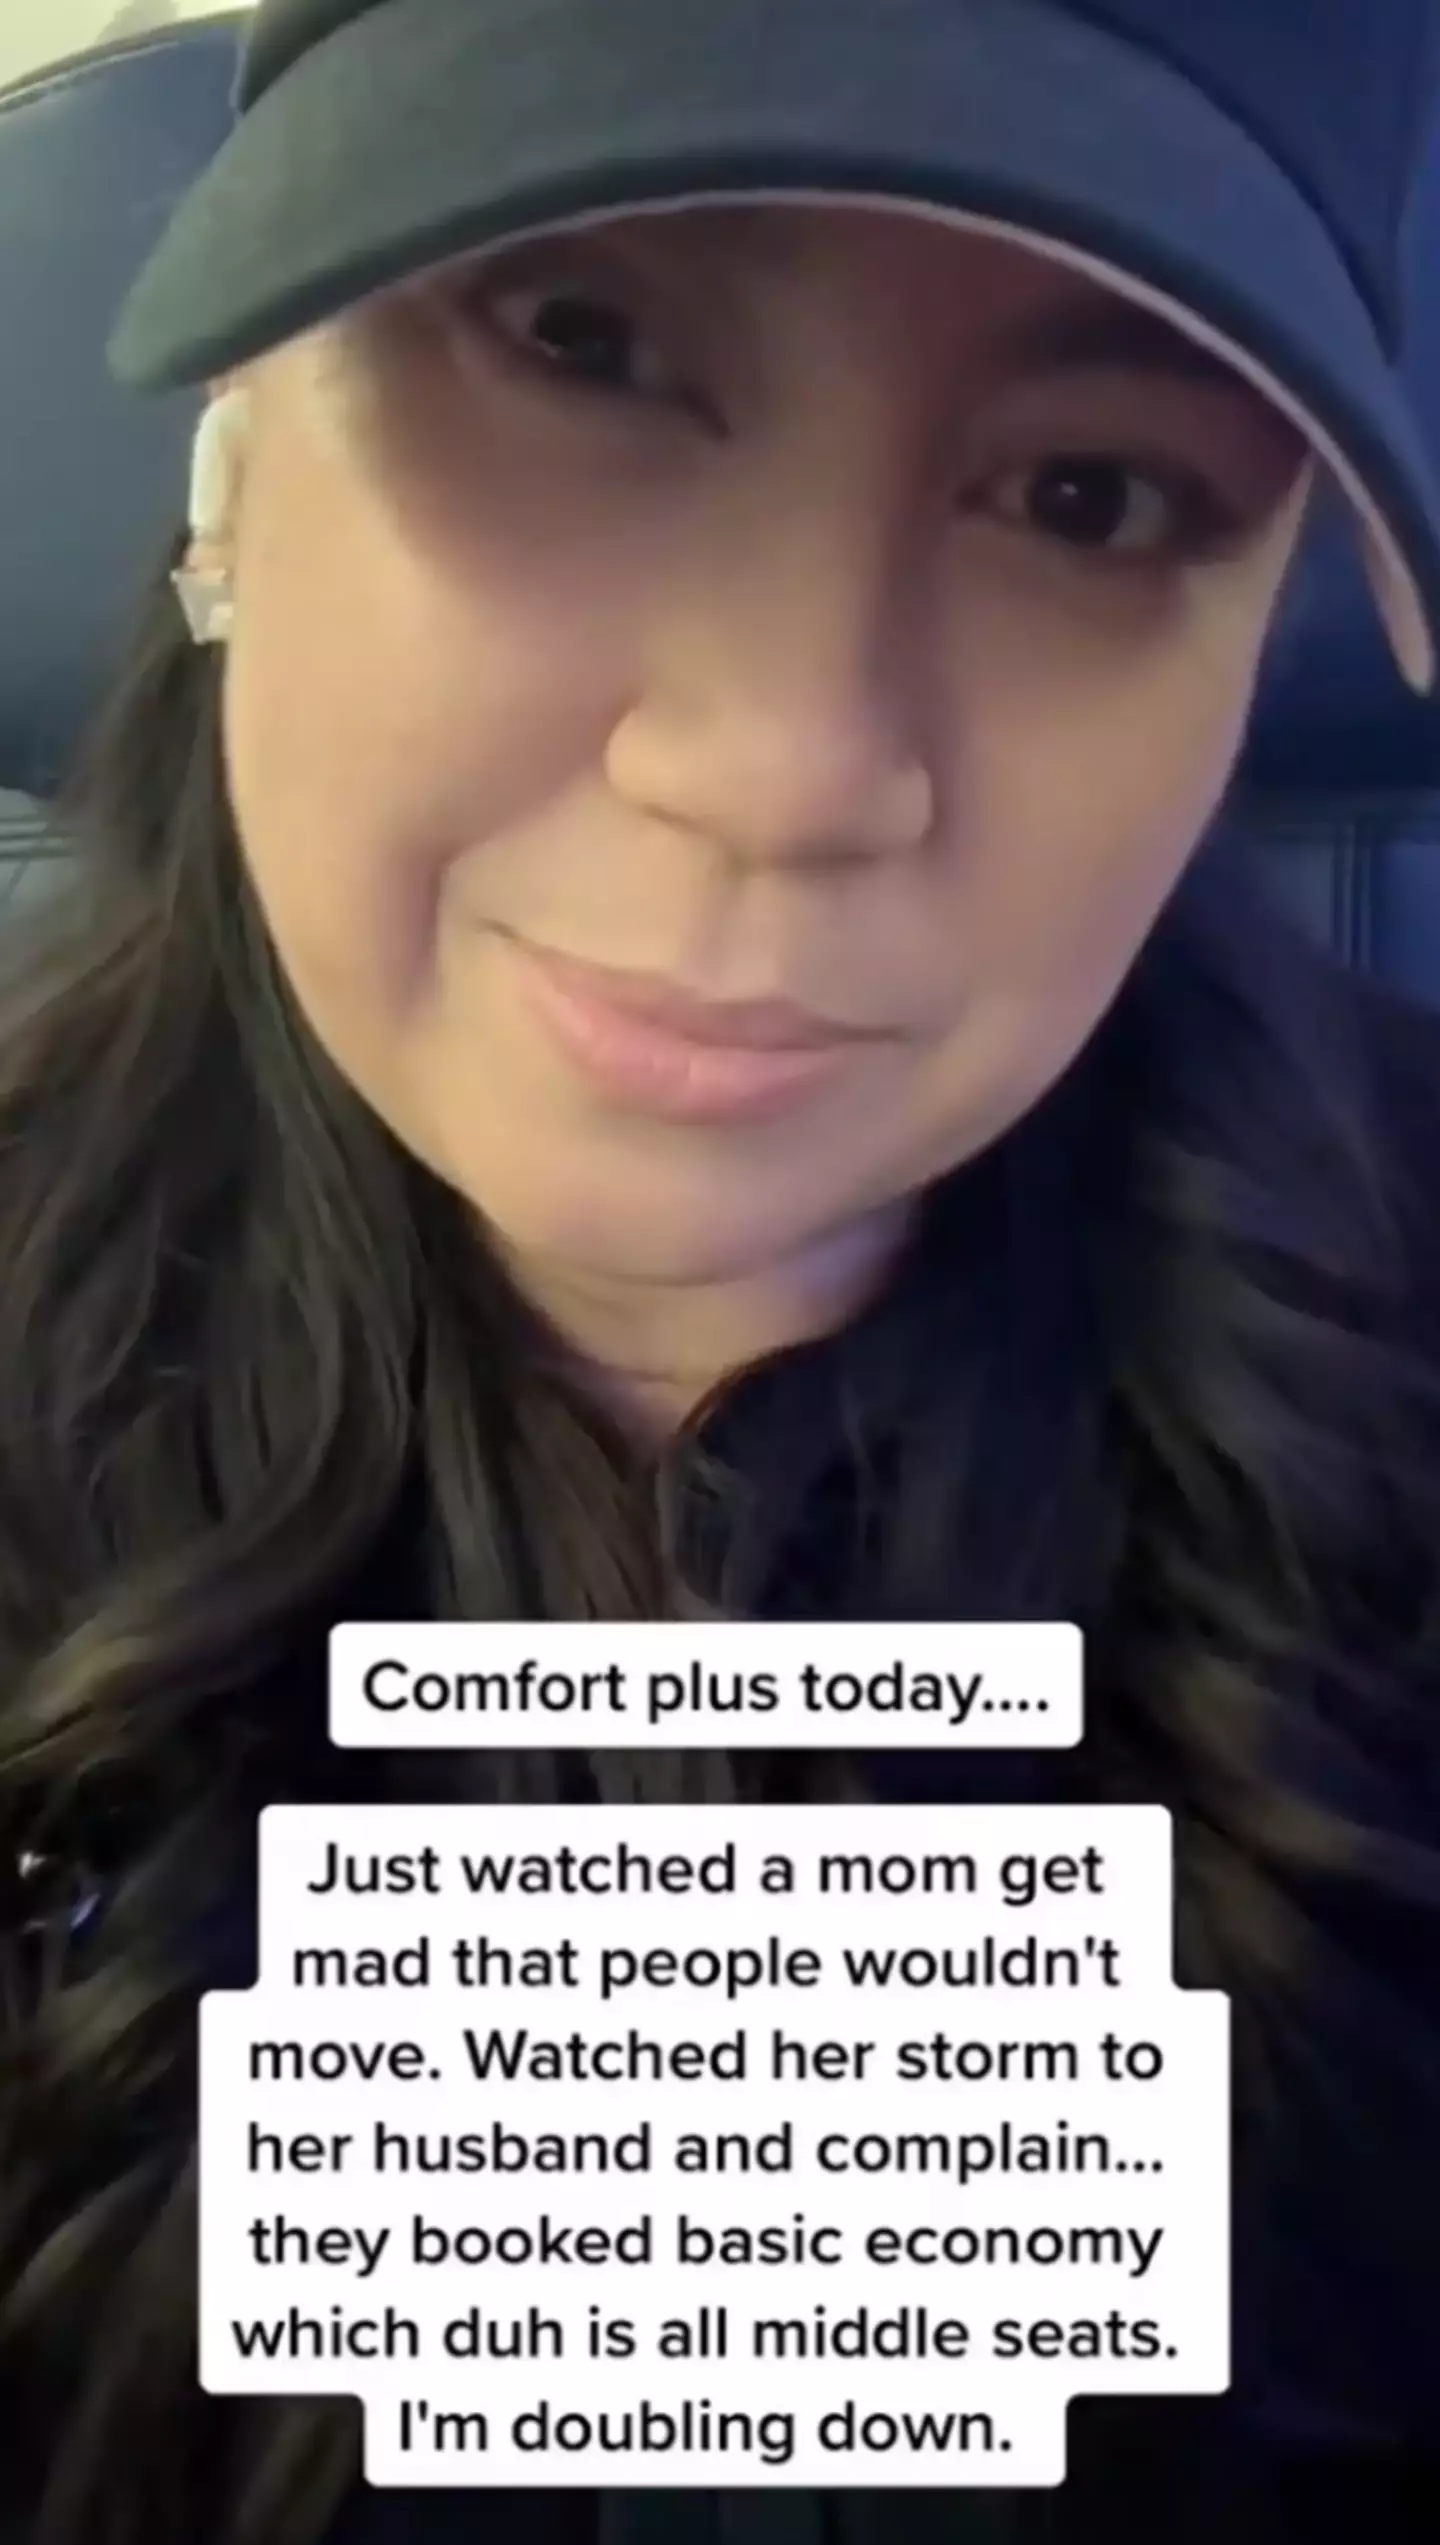 She says if families want to sit together they need to plan ahead (TikTok/@maresasd)